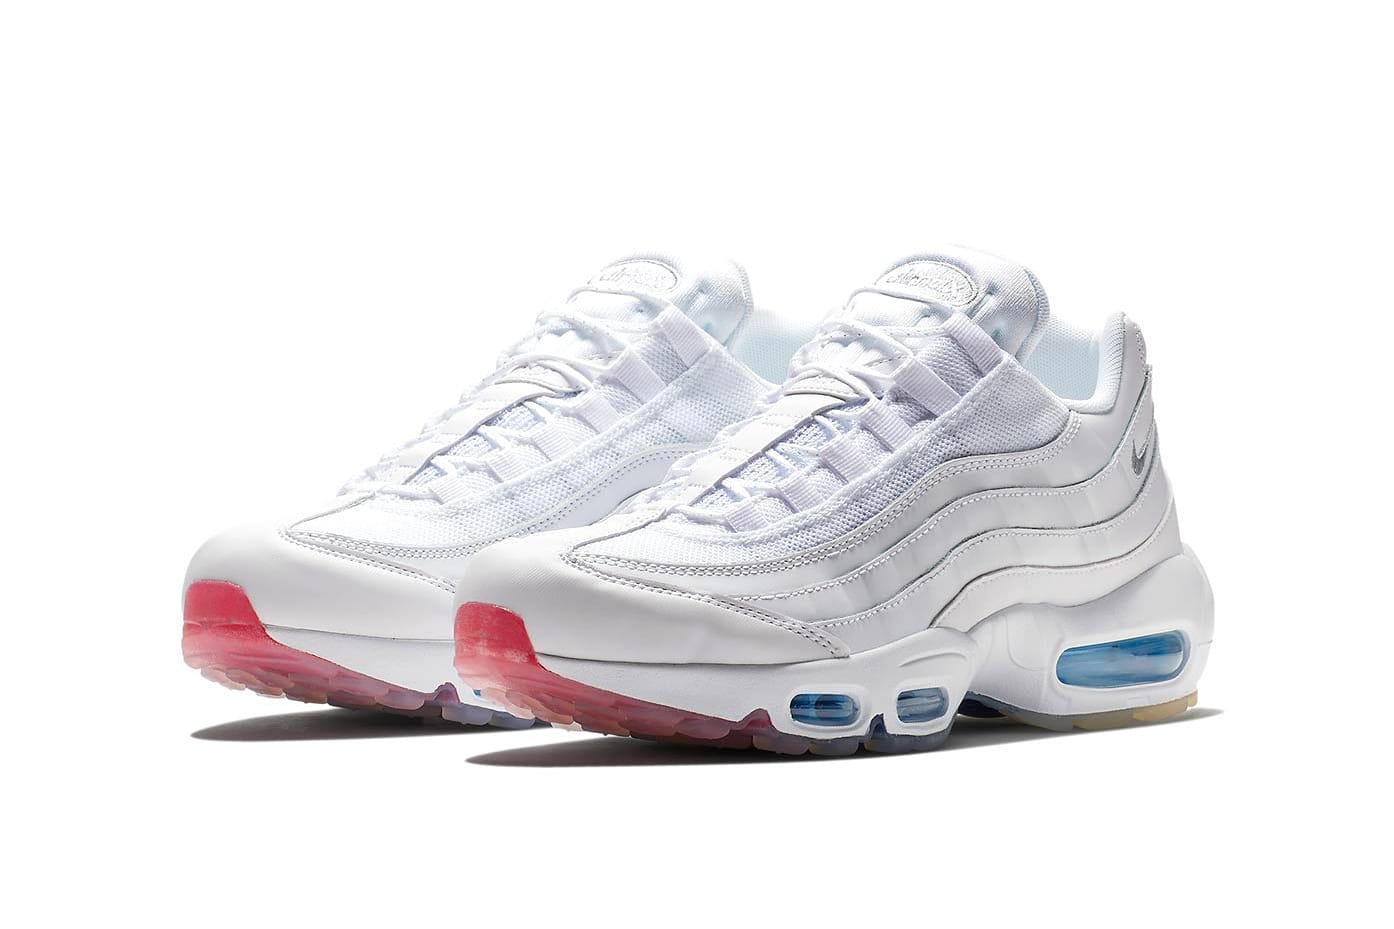 Gradient Sole to the Air Max 95 